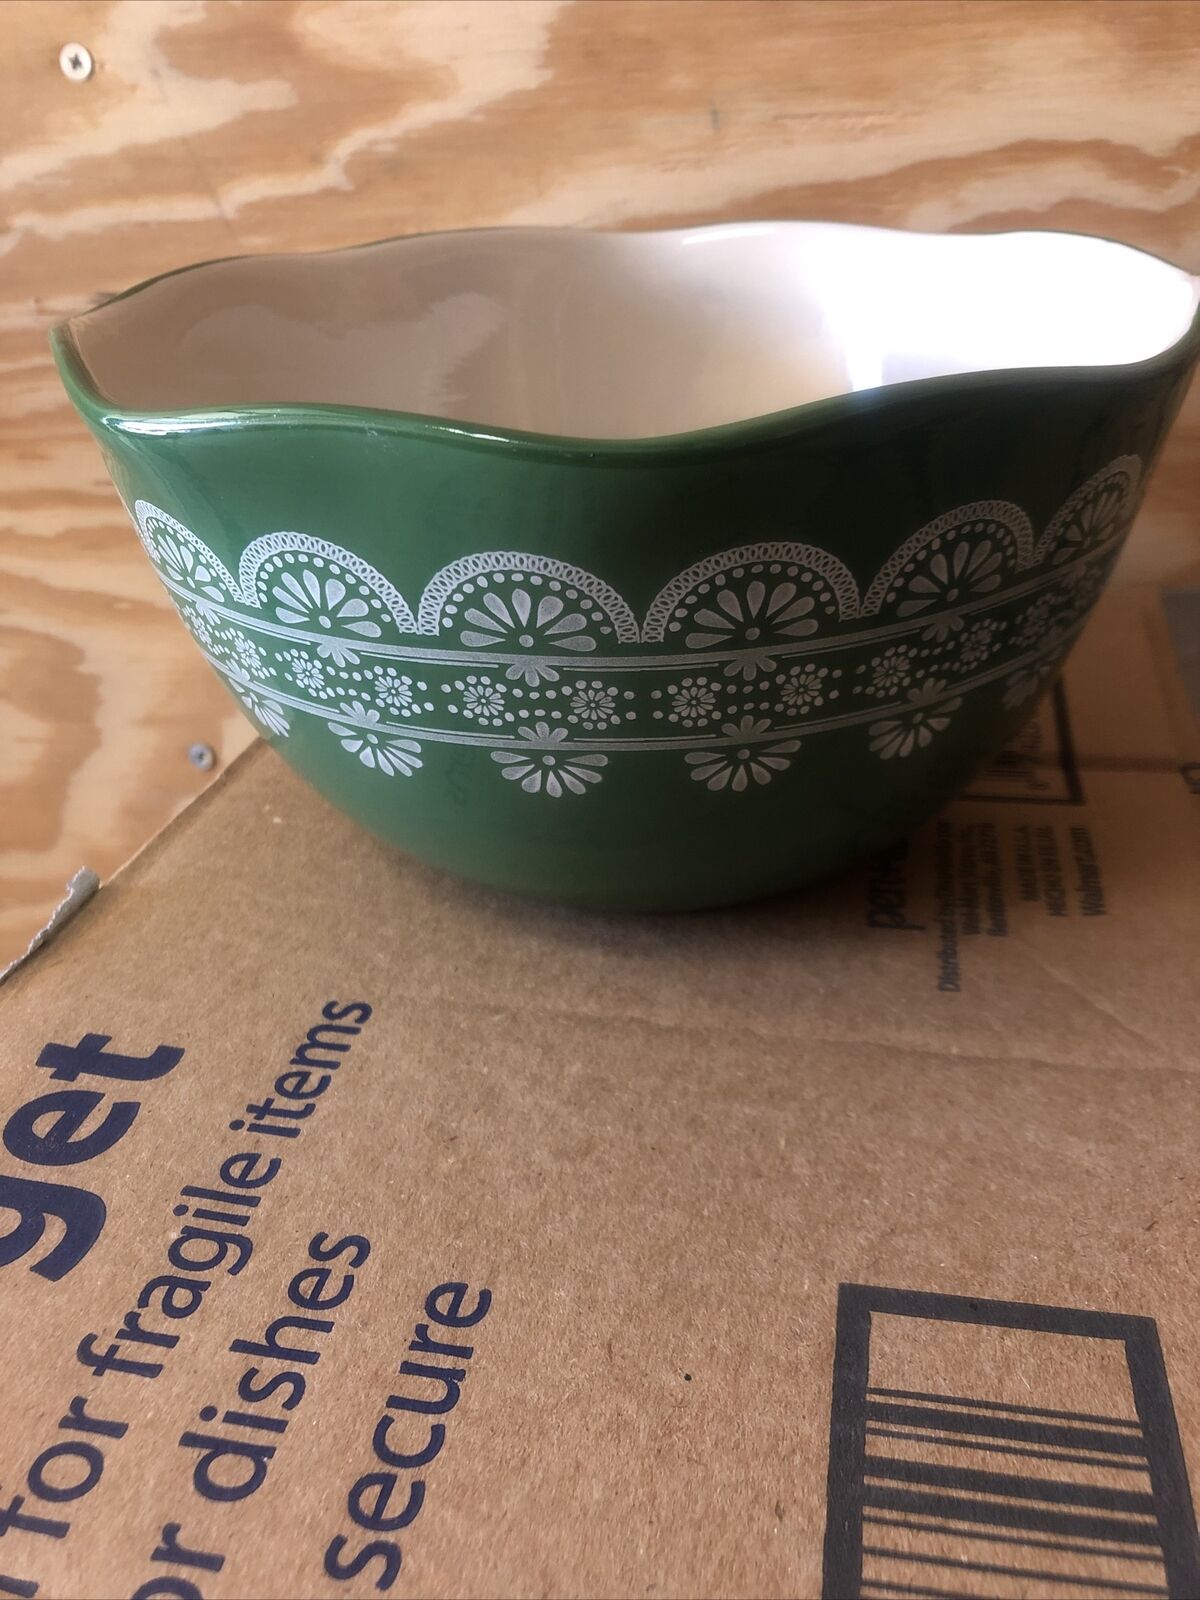 Pioneer Woman Green Mixing Bowl Time sale Over item handling ☆